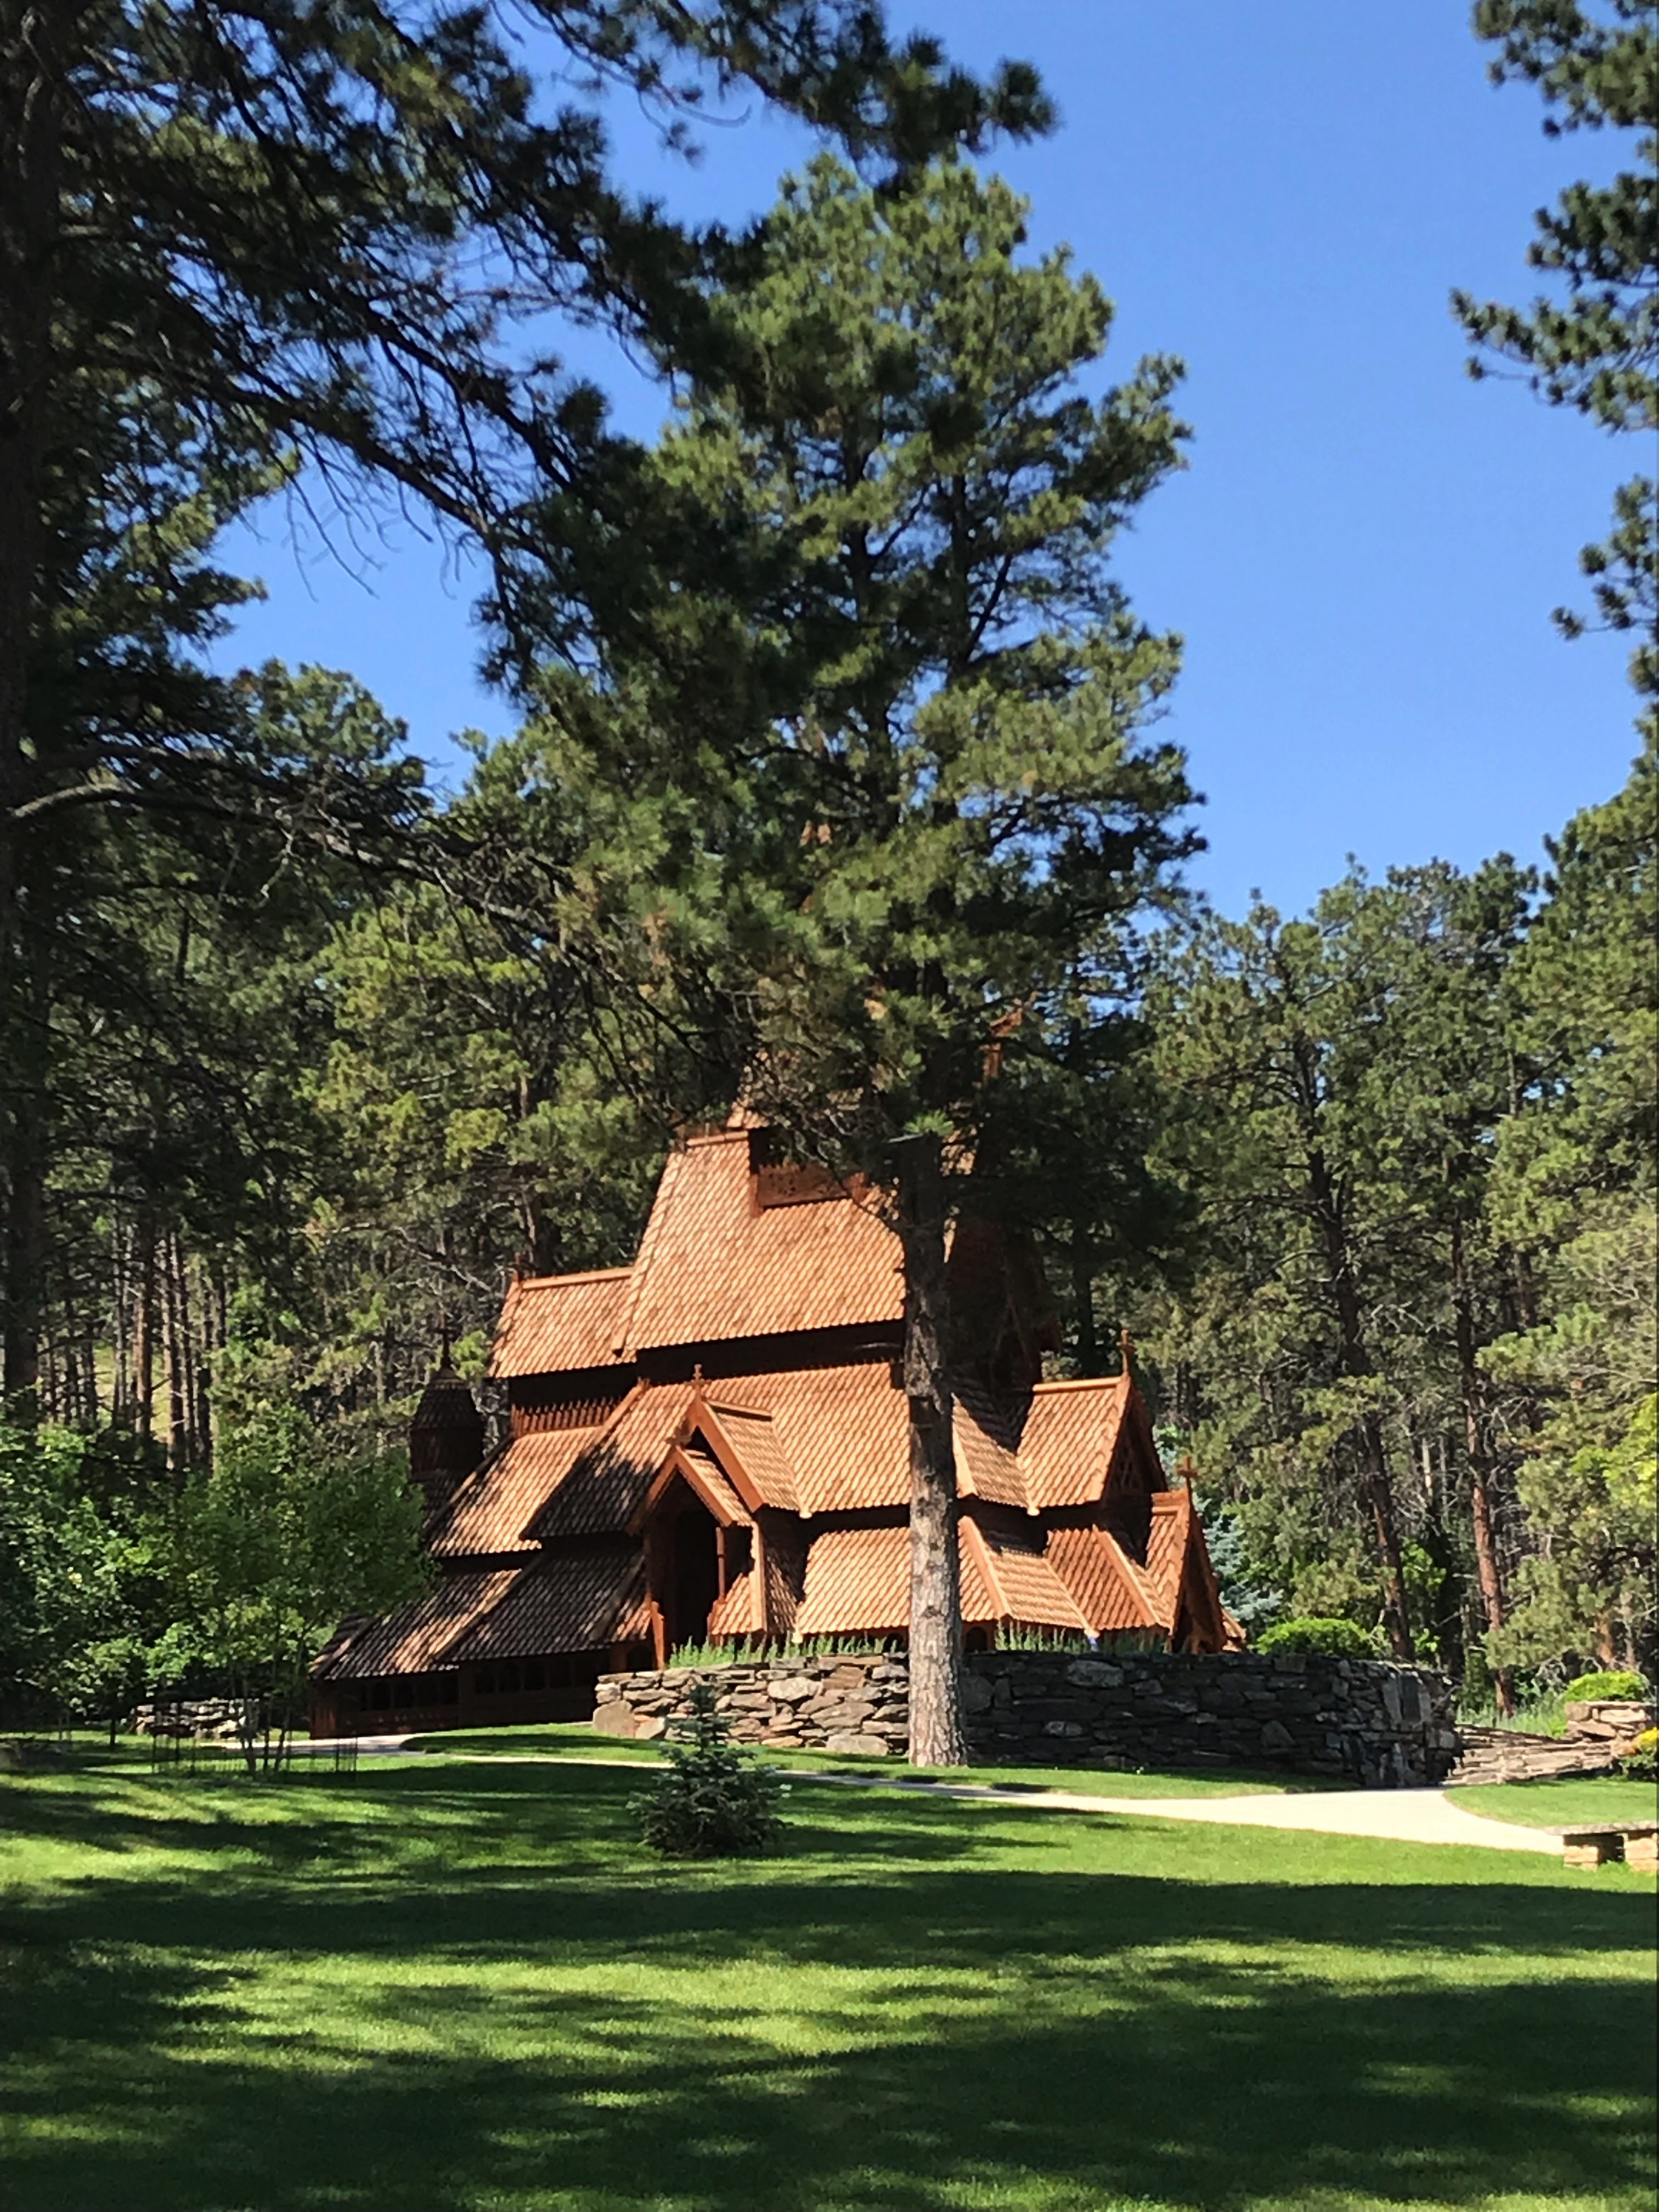 A wooden church stands amongst trees on a green lawn